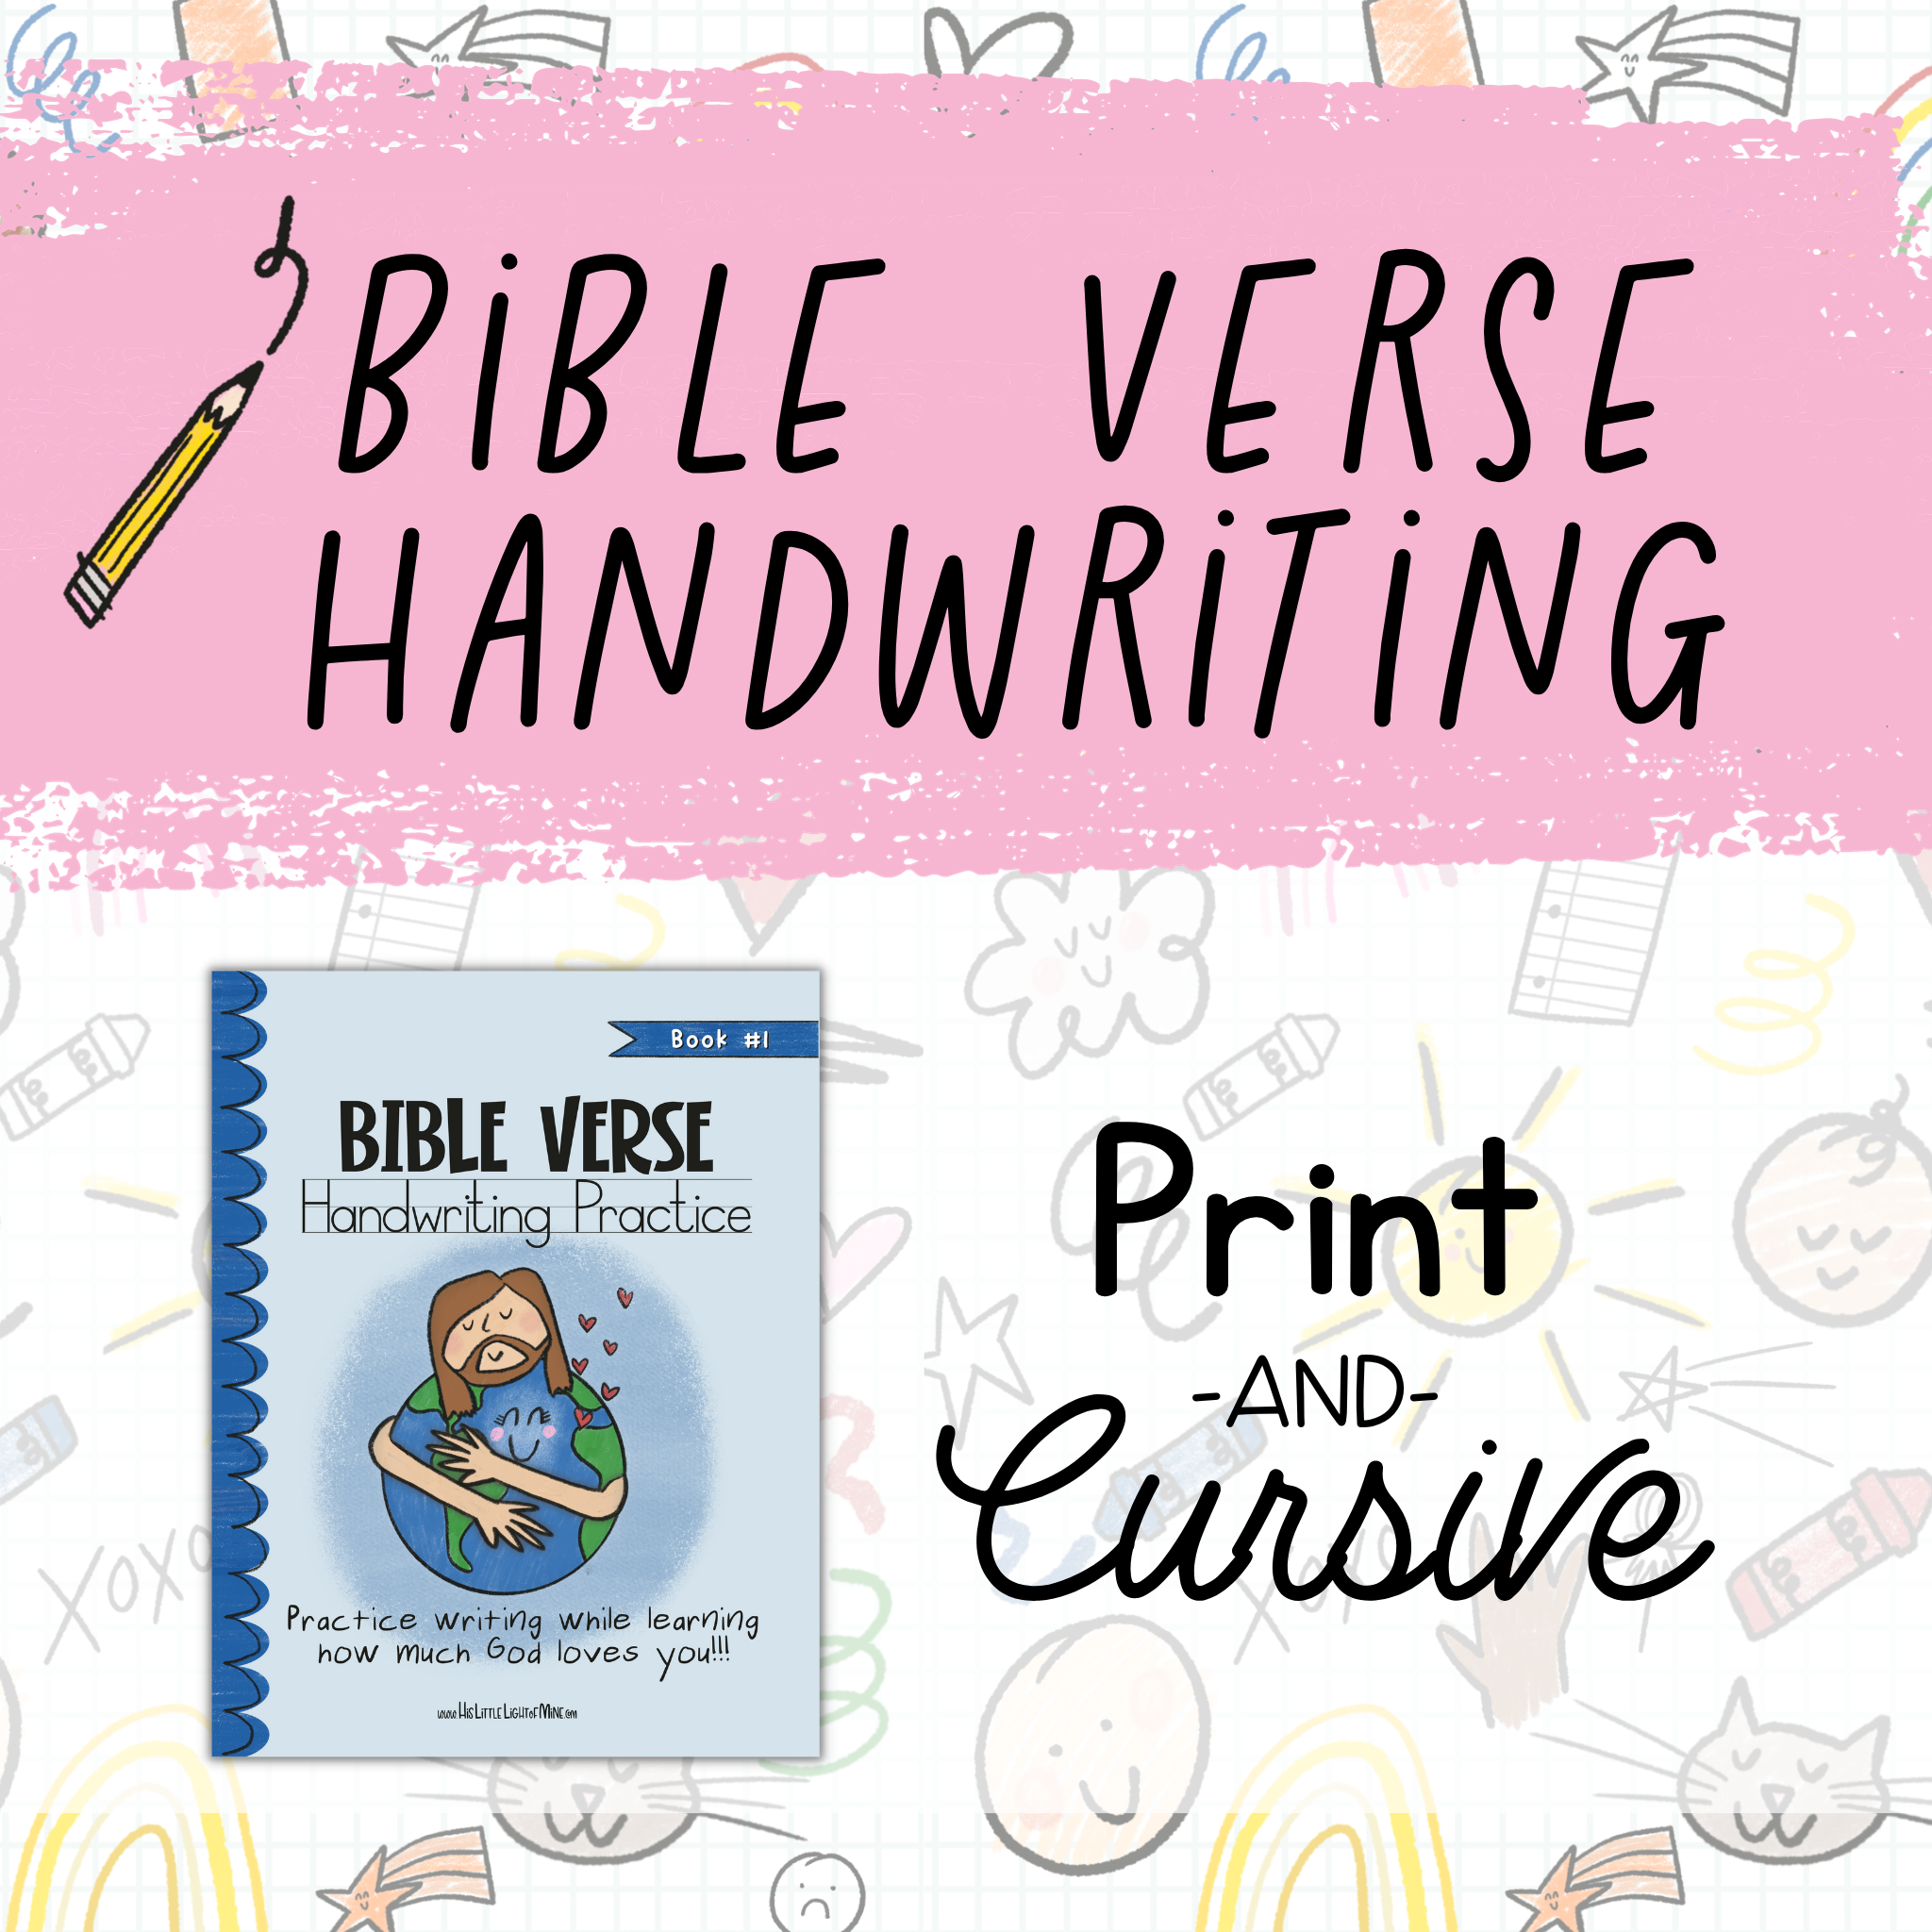 Bible Verse Handwriting Books in Print and Cursive Button created on Kindle Direct Publishing by self published author and illustrator Lindsay Dain.